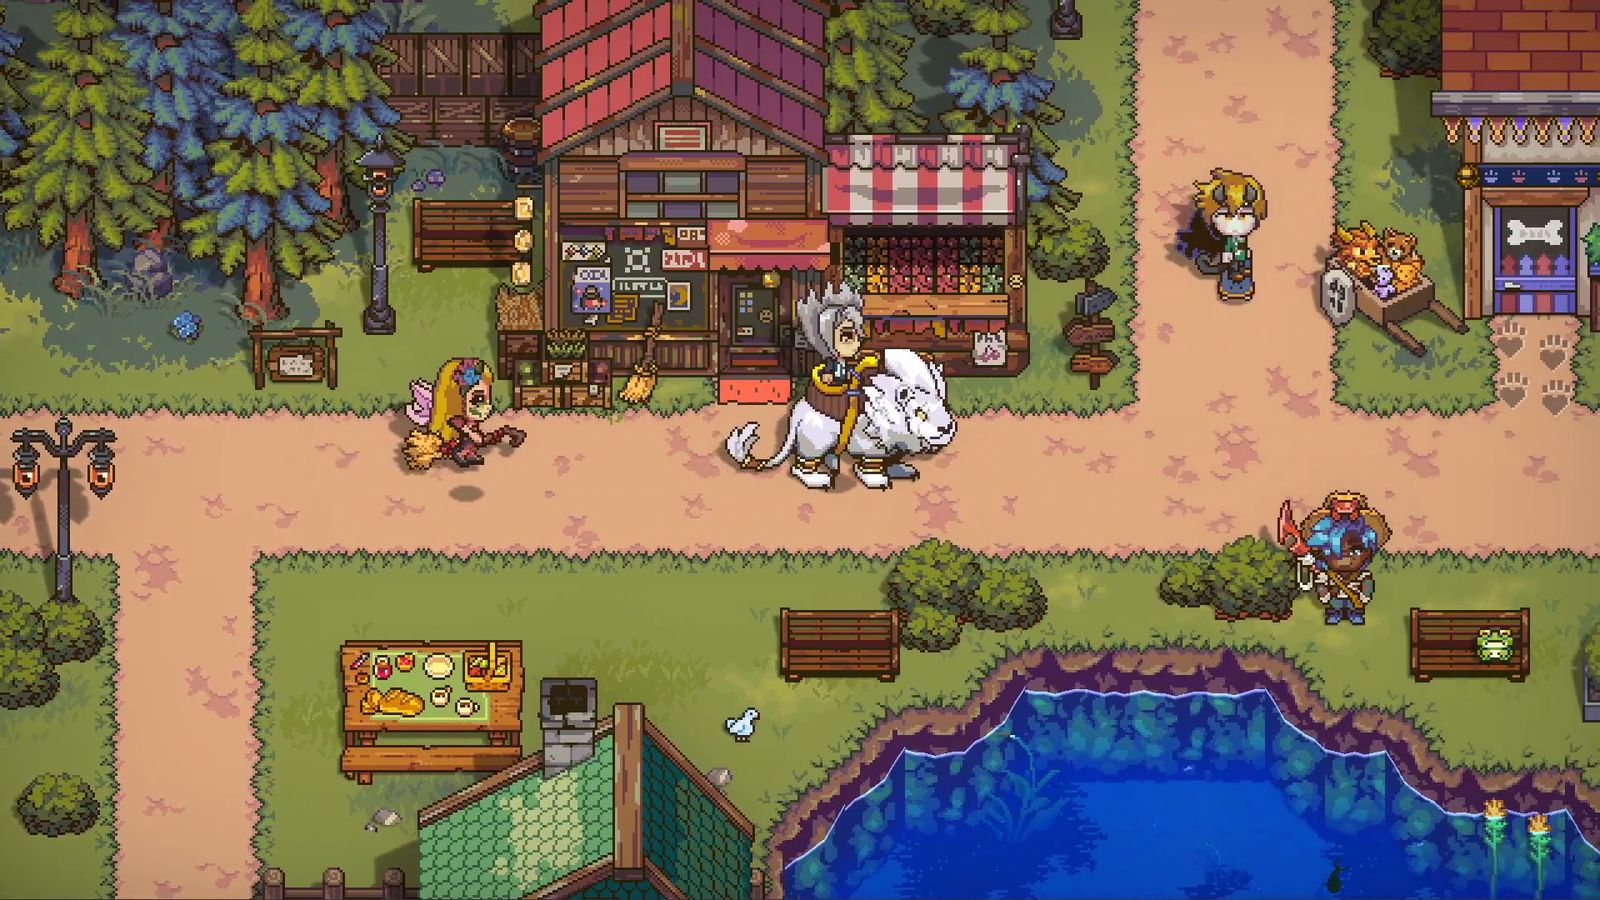 In-game image from Sun Haven of a character riding a white lion through a town.